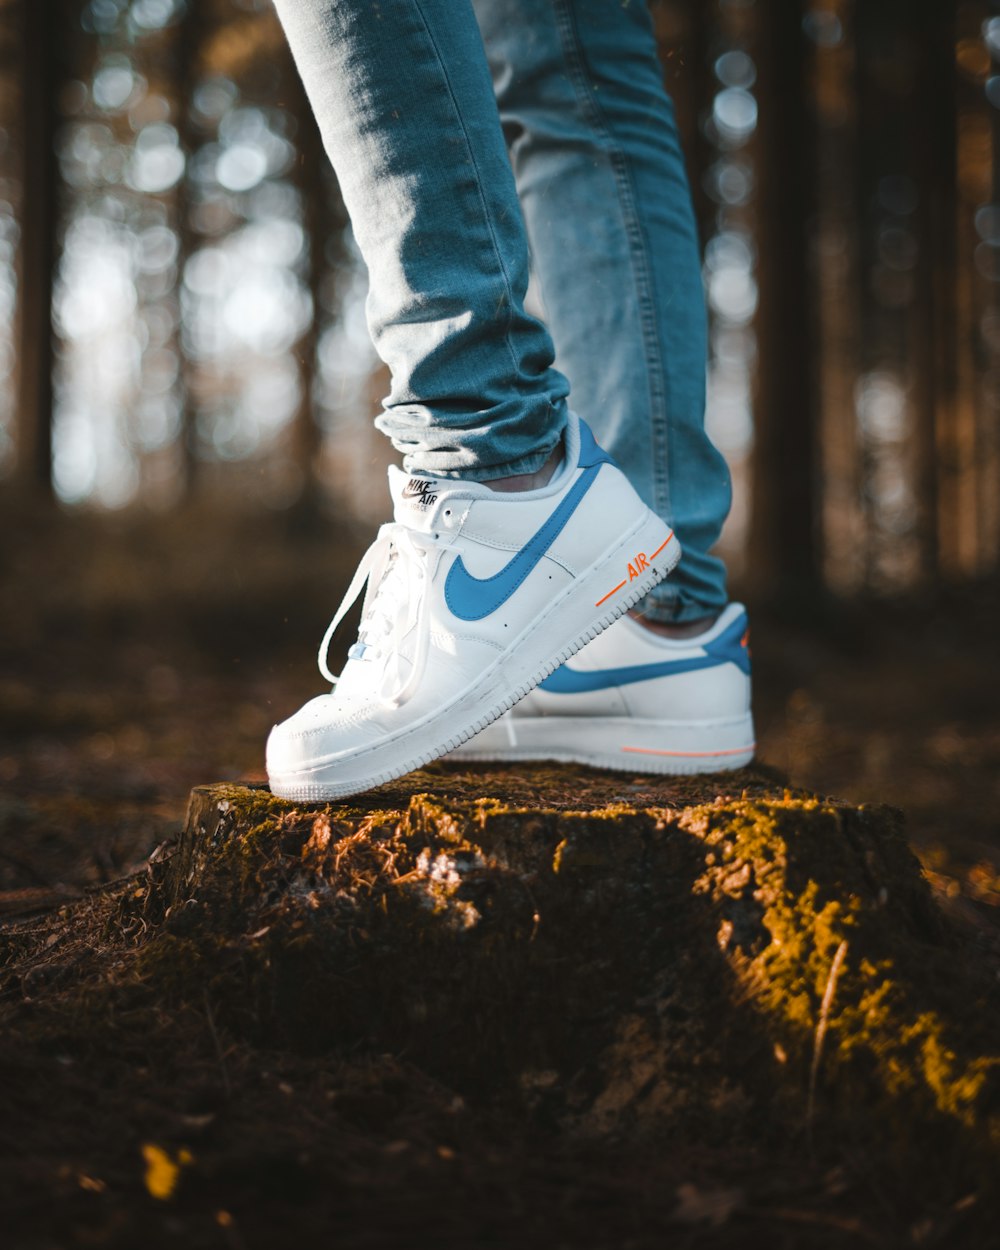 Person wearing blue denim jeans and white Nike Air Max shoes standing on  tree stomp photo – Free Shoes Image on Unsplash